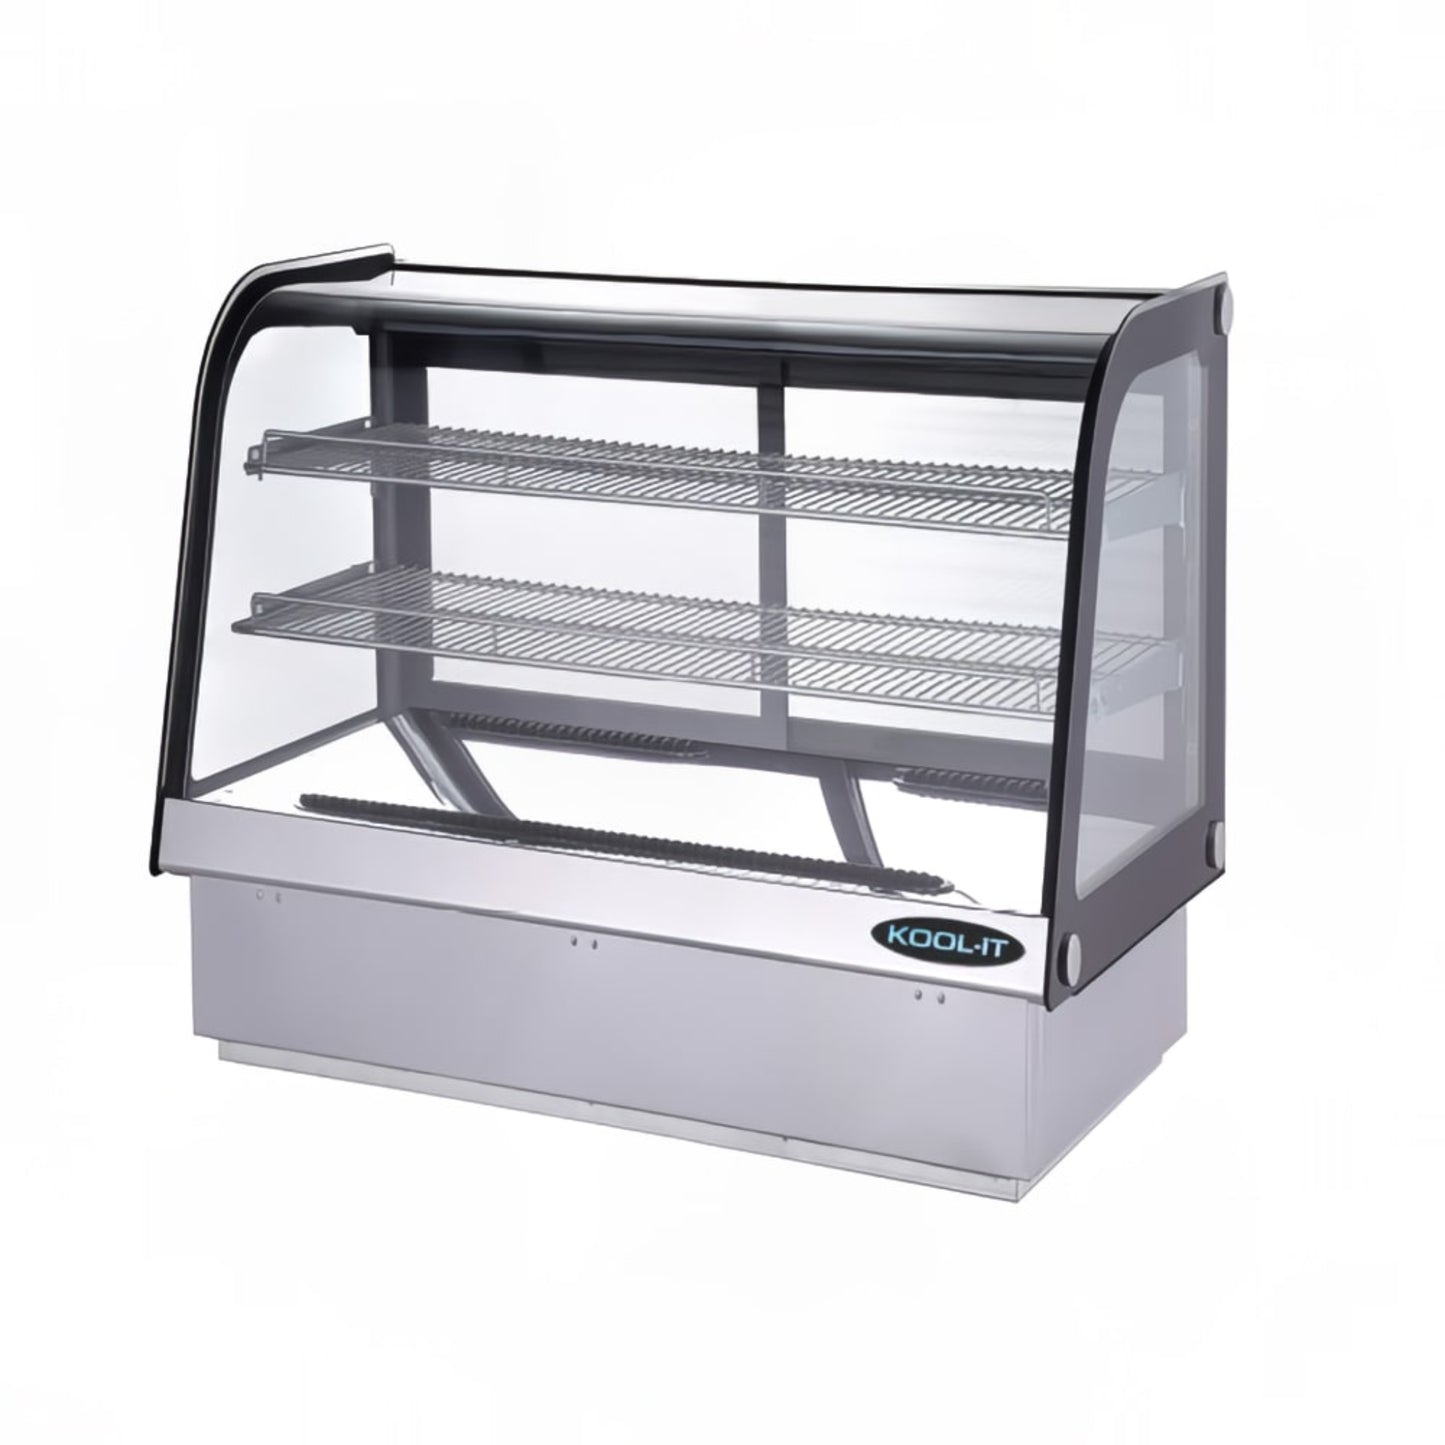 Kool-It KCD-36 36" Countertop Refrigerated Display Case